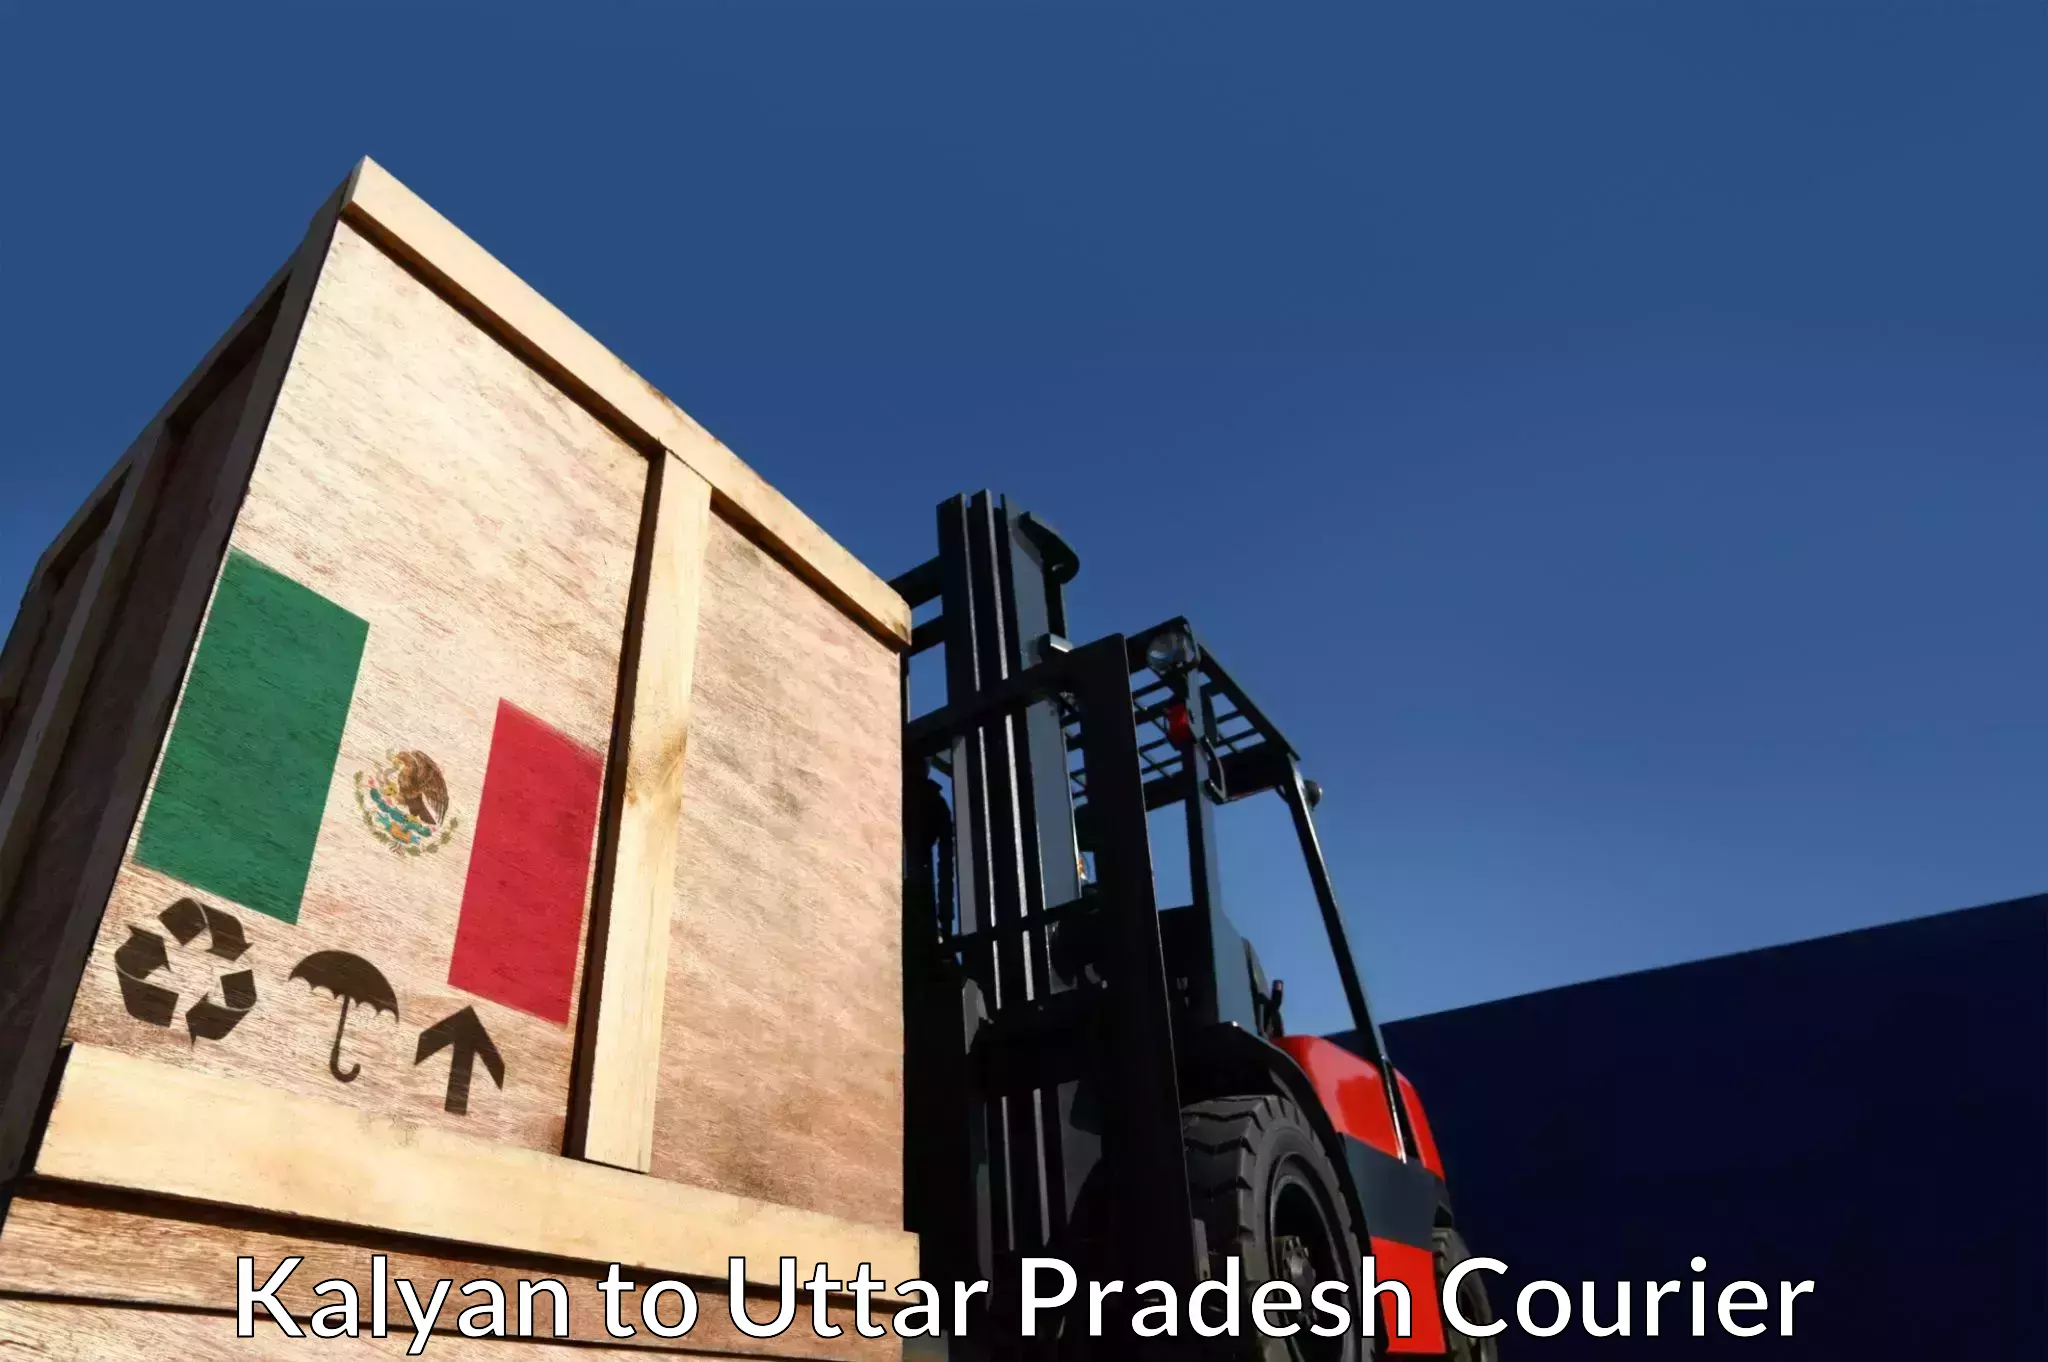 24-hour courier services in Kalyan to Rath